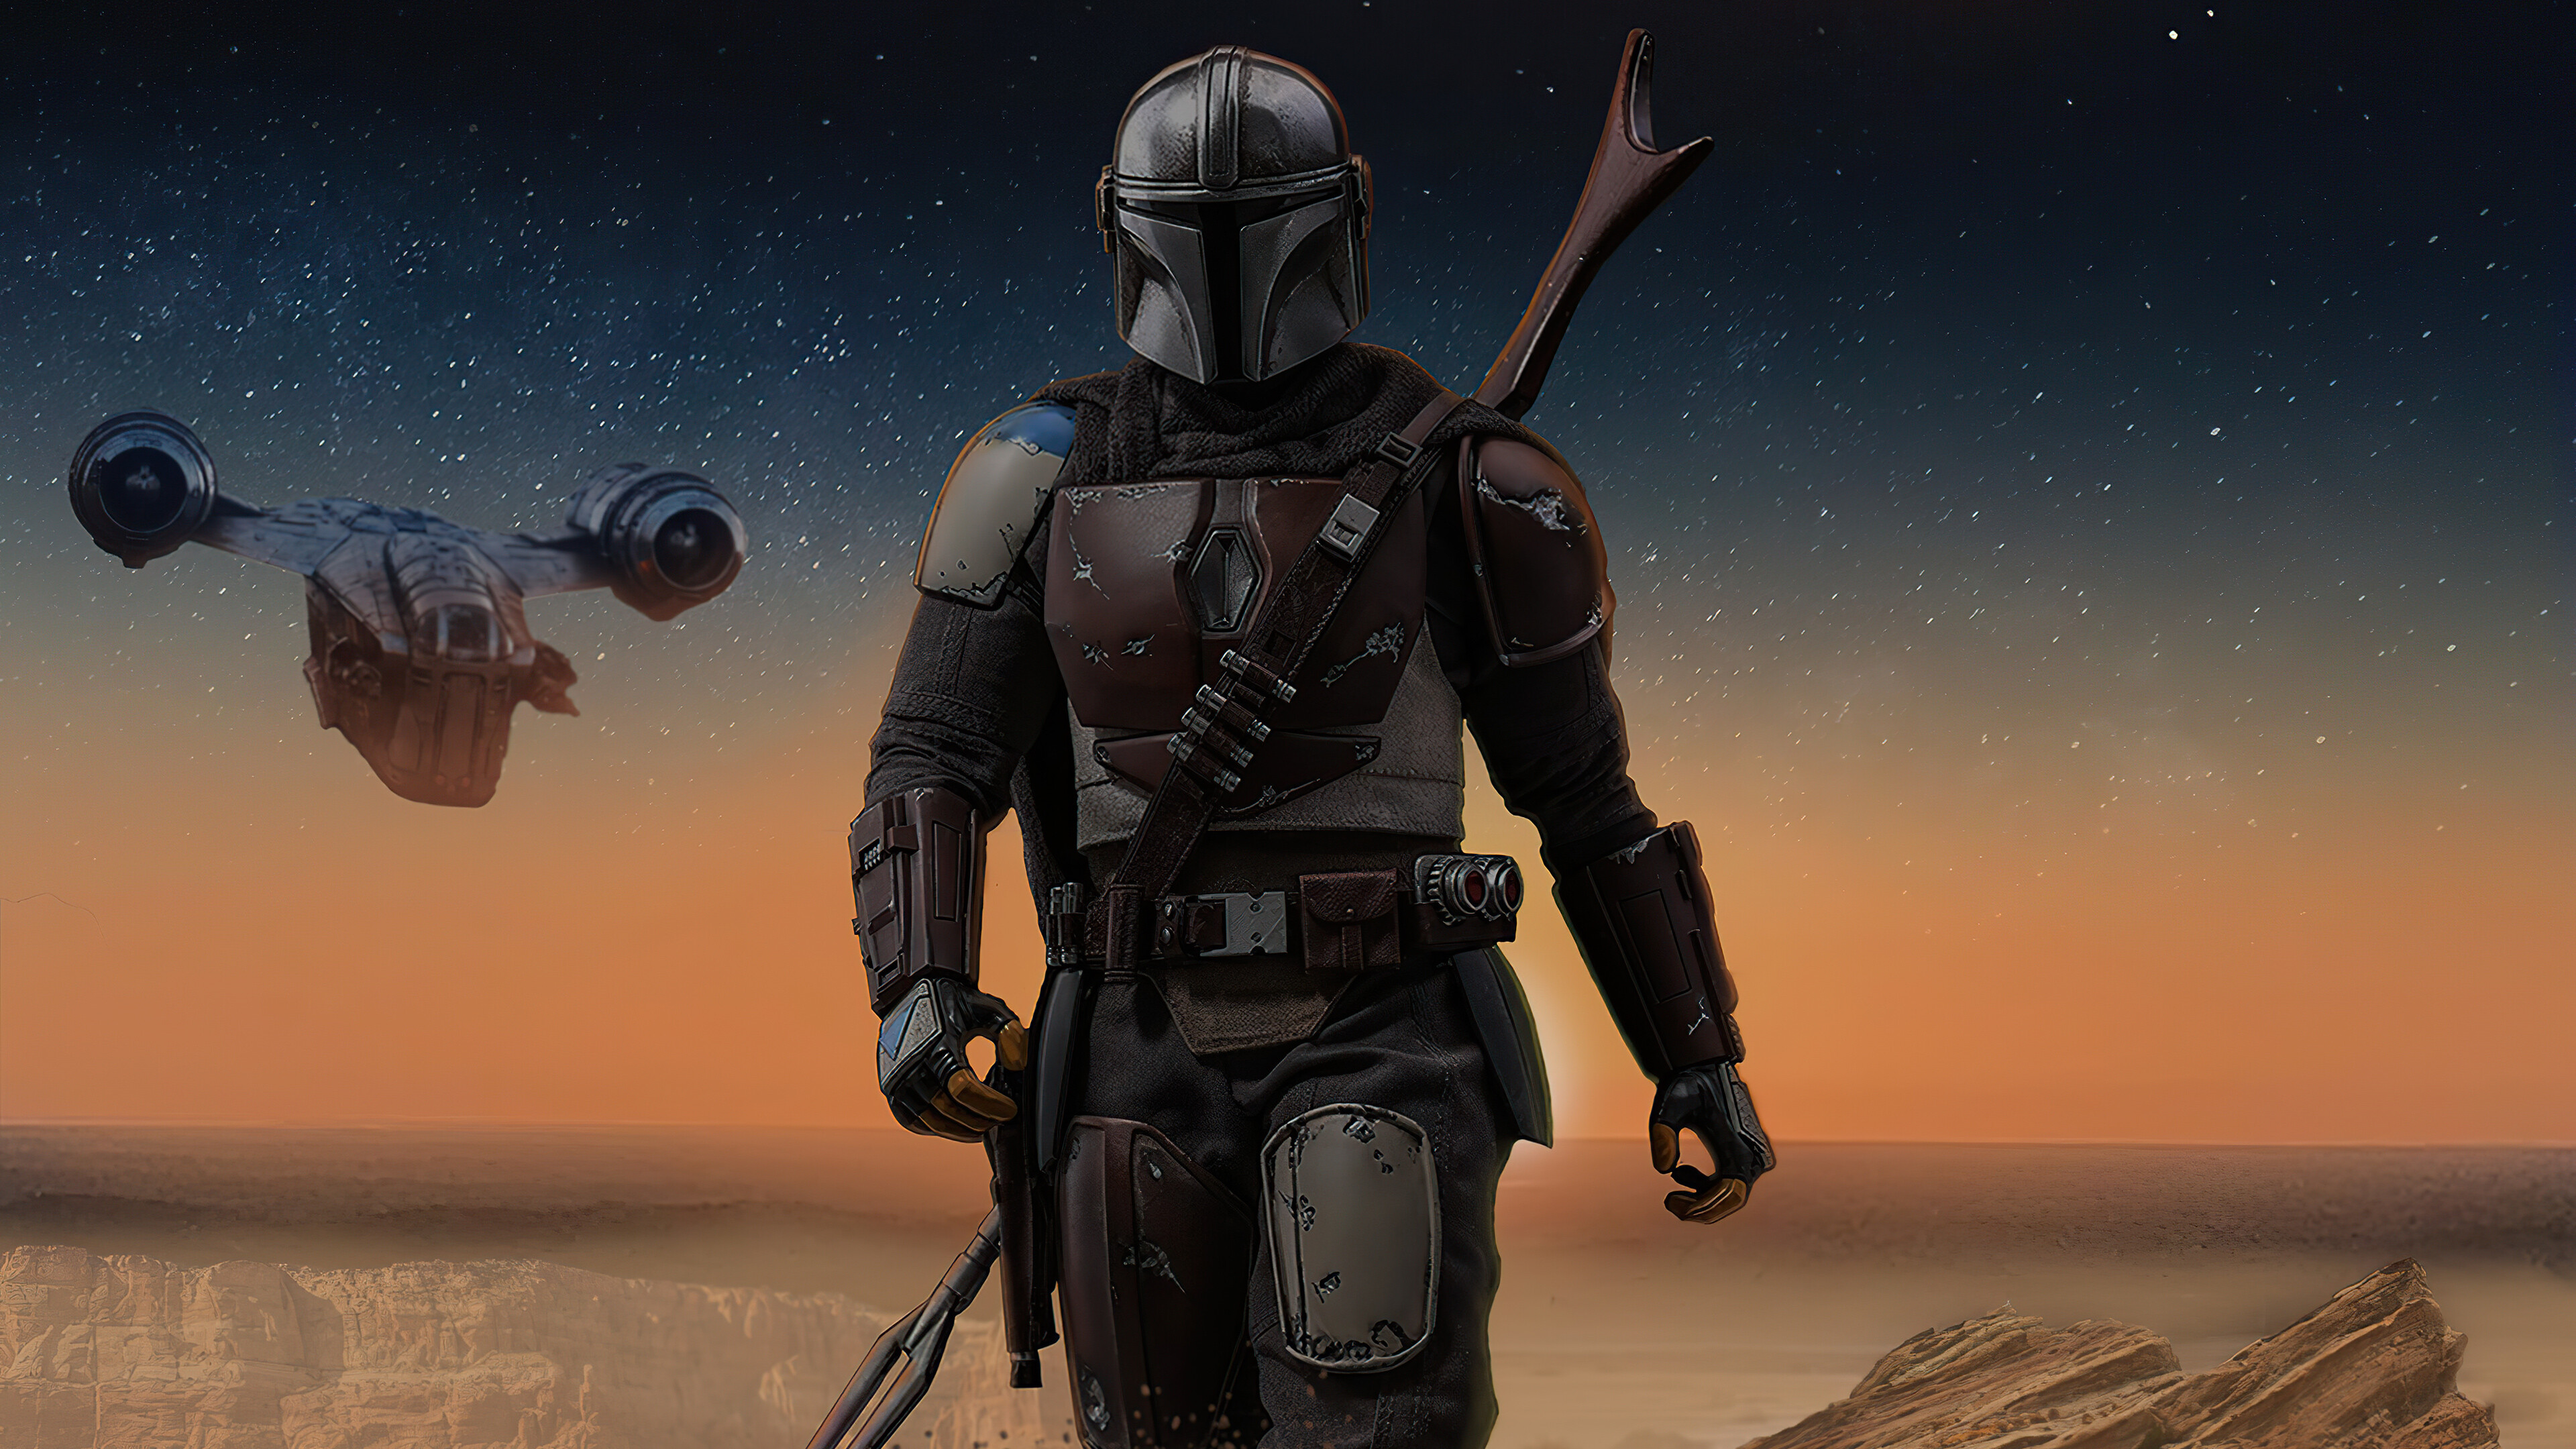 The Mandalorian: A live-action space western Star Wars television series developed by Lucasfilm. 3840x2160 4K Wallpaper.